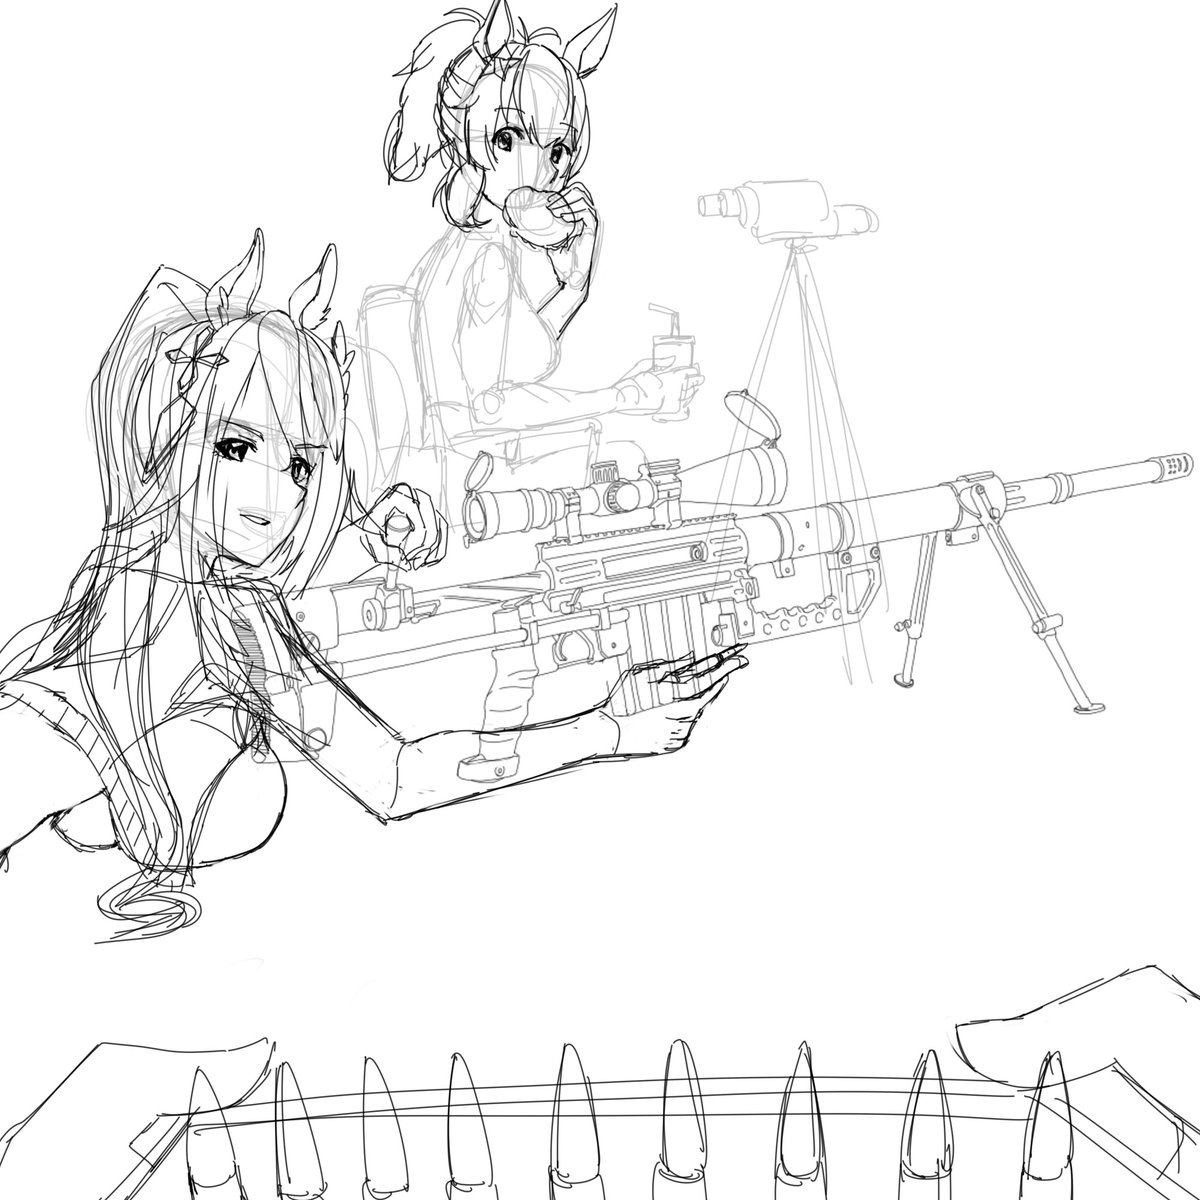 I am drawing the M200